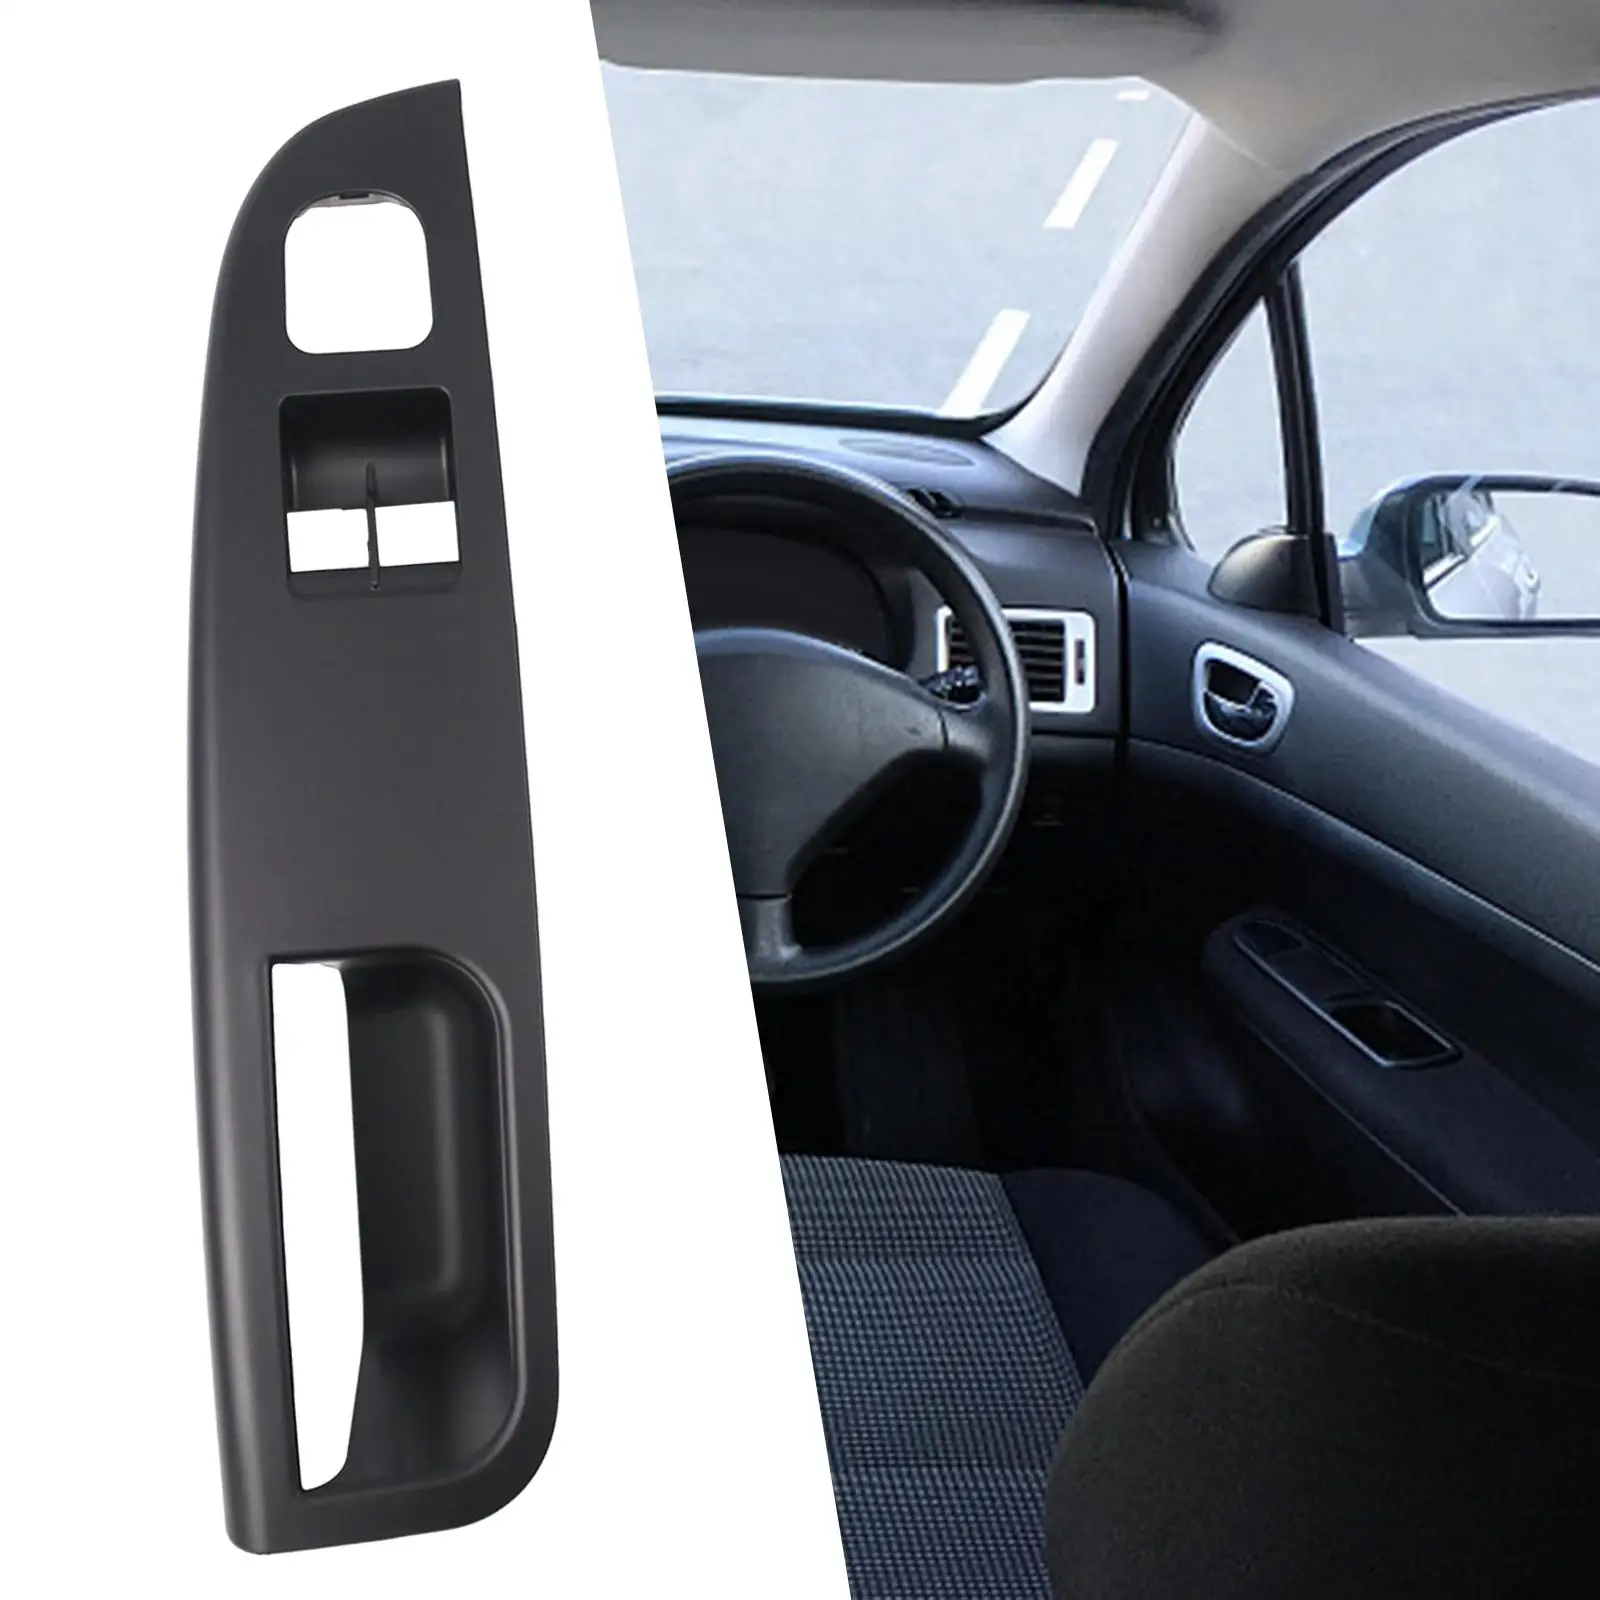 Driver Front Right Side Door Trim 1K3868050B Durable for VW Golf GTI Automobile Repairing Accessory Interior Control Cover